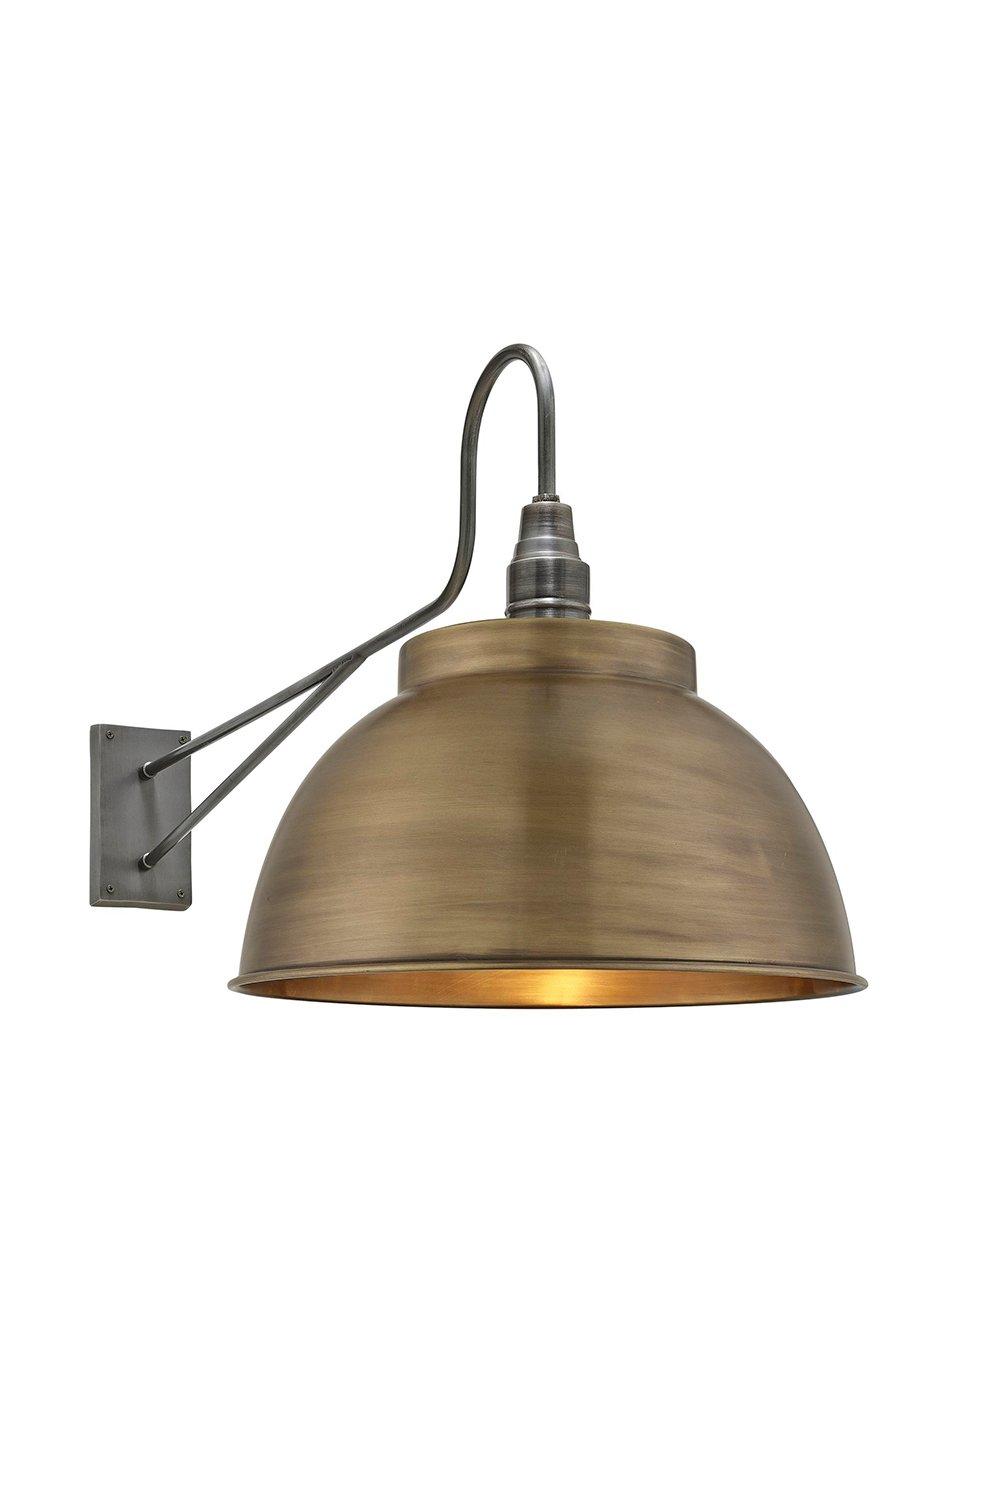 Long Arm Dome Wall Light, 17 Inch, Brass, Pewter Holder